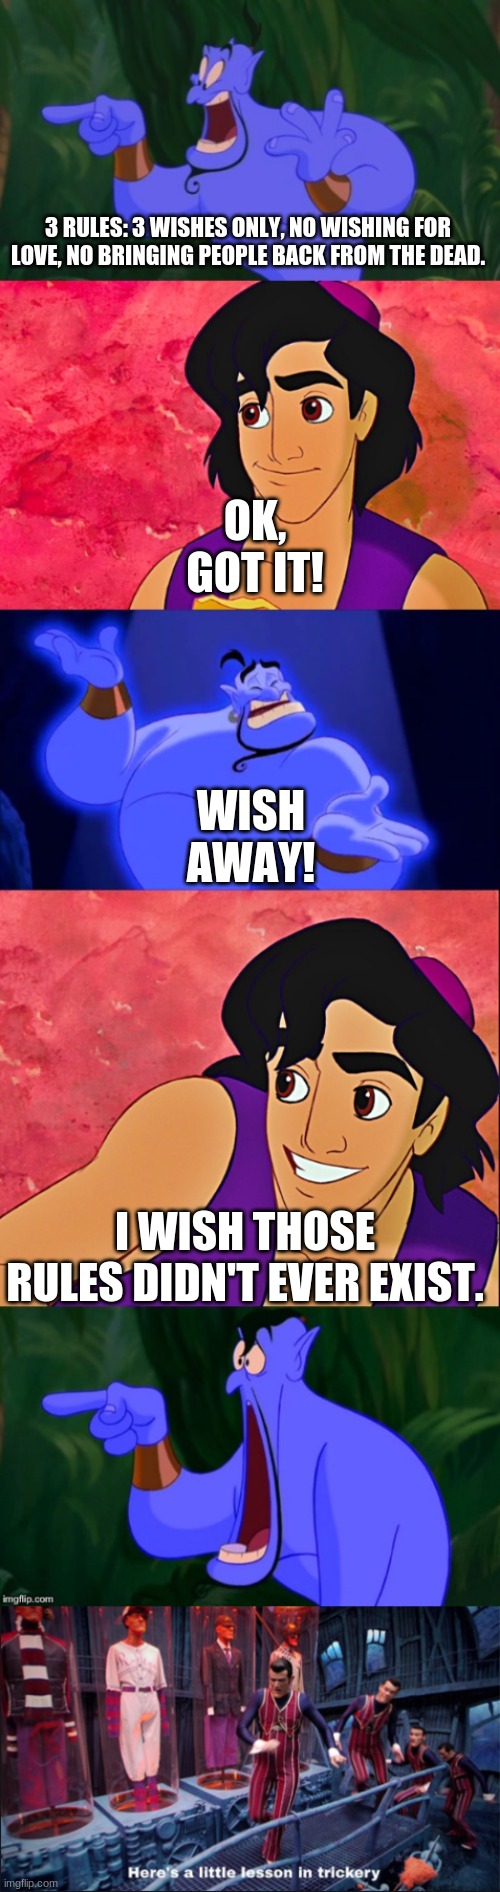 Aladdin is big brain | OK, GOT IT! 3 RULES: 3 WISHES ONLY, NO WISHING FOR LOVE, NO BRINGING PEOPLE BACK FROM THE DEAD. WISH AWAY! I WISH THOSE RULES DIDN'T EVER EXIST. | image tagged in aladdin and the genie,here's a little lesson in trickery | made w/ Imgflip meme maker